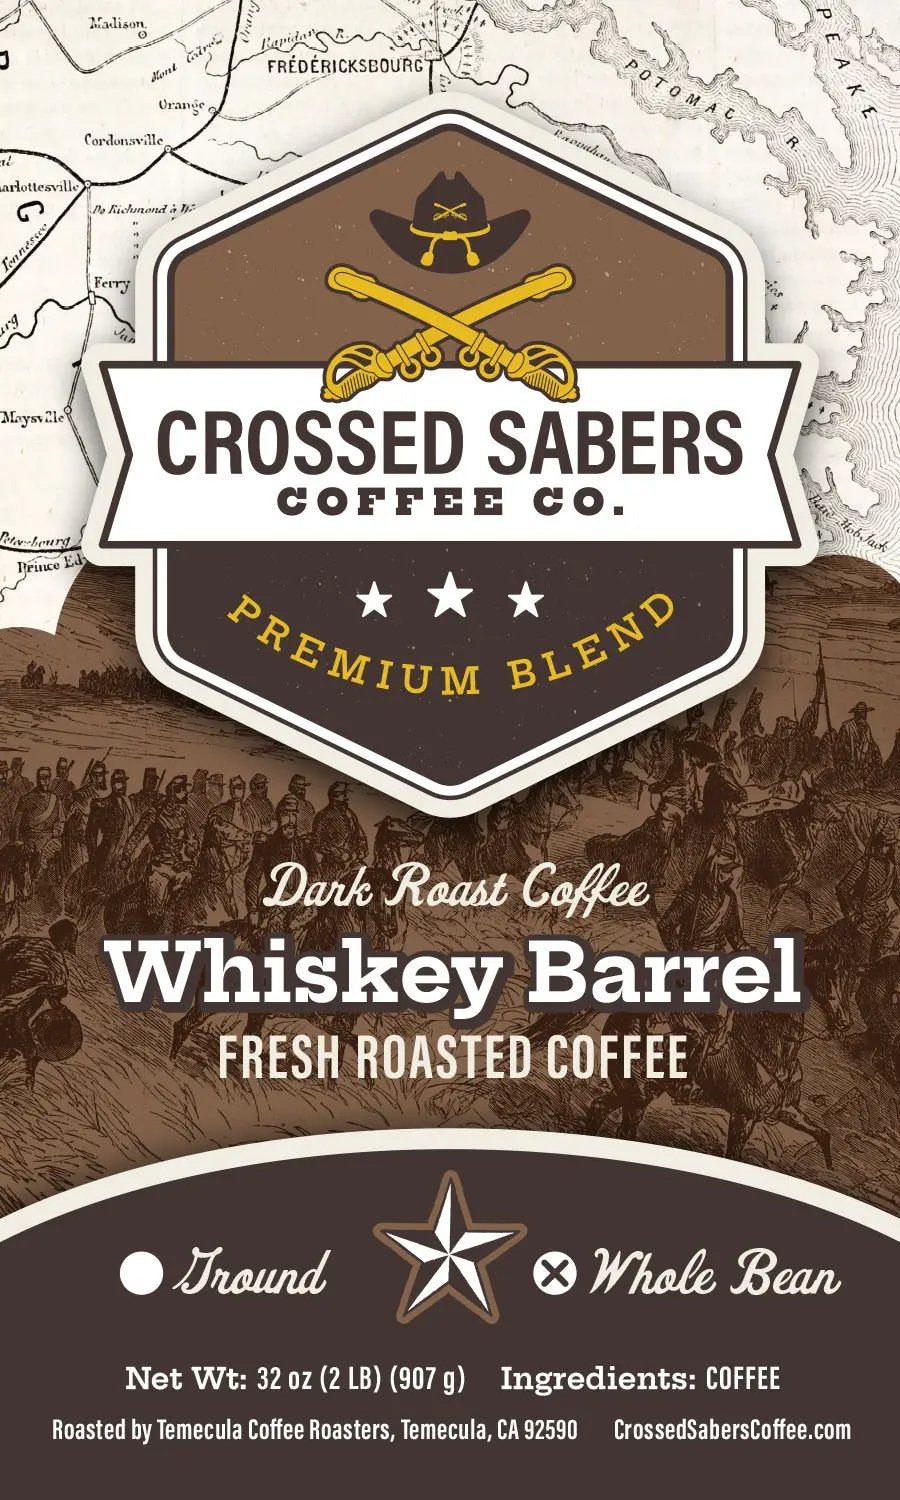 Crossed Sabers Coffee Whiskey Barrel 2lb Whole Bean